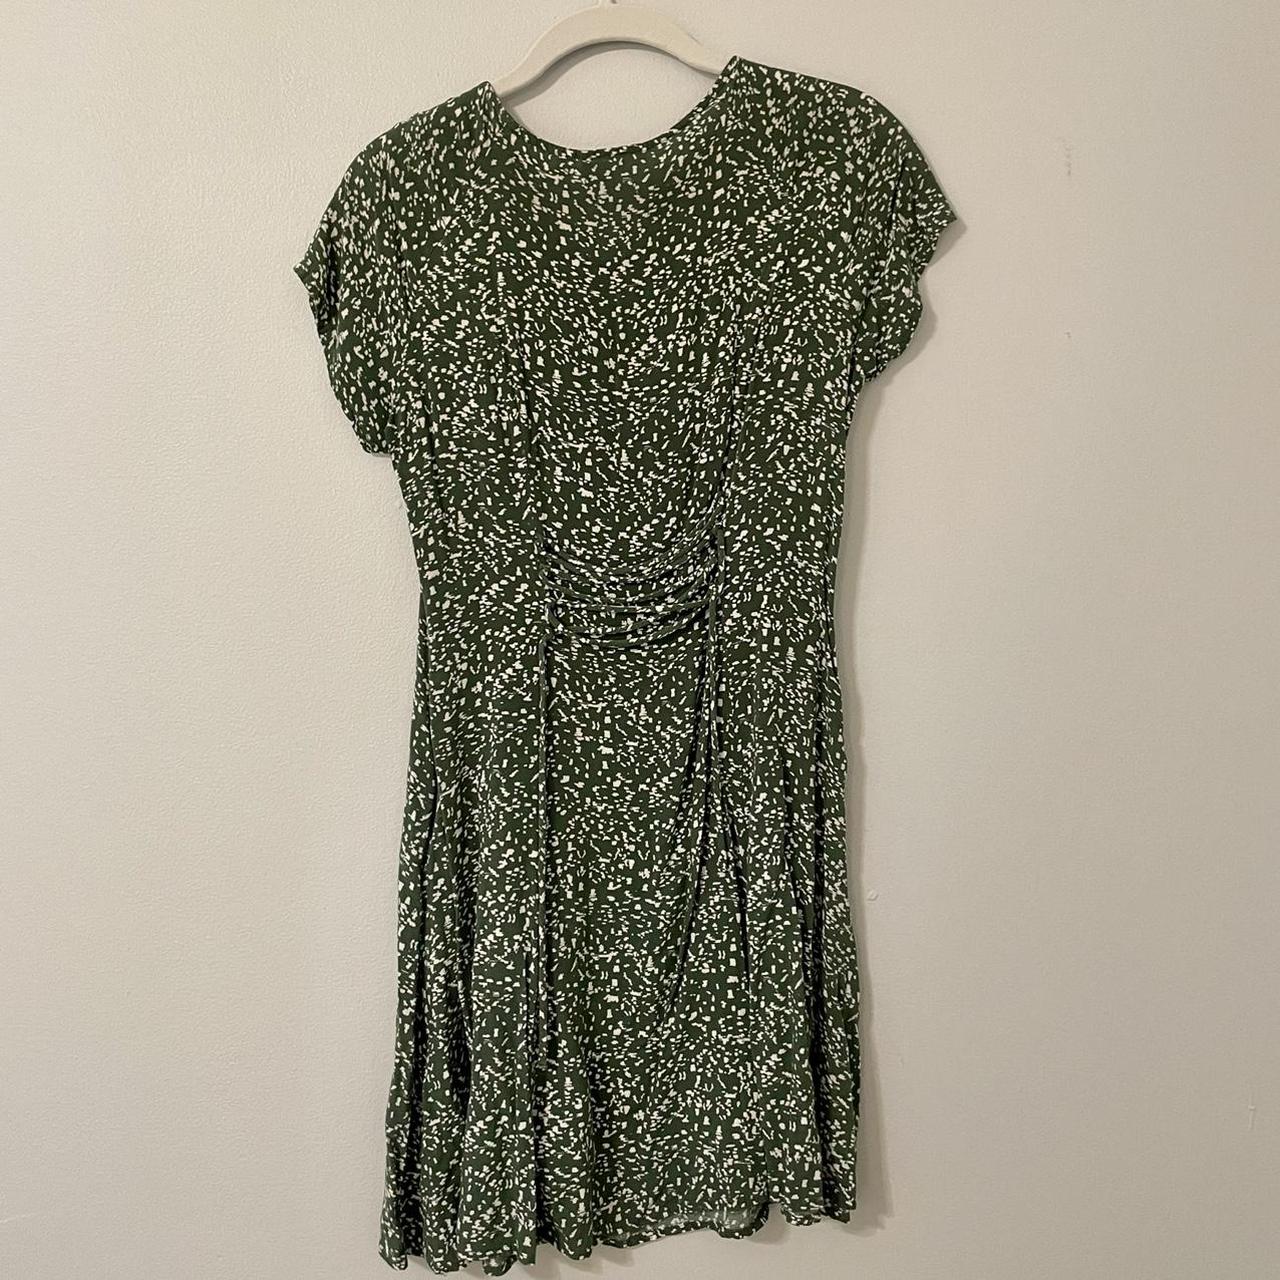 Weekday Women's Green and White Dress (2)